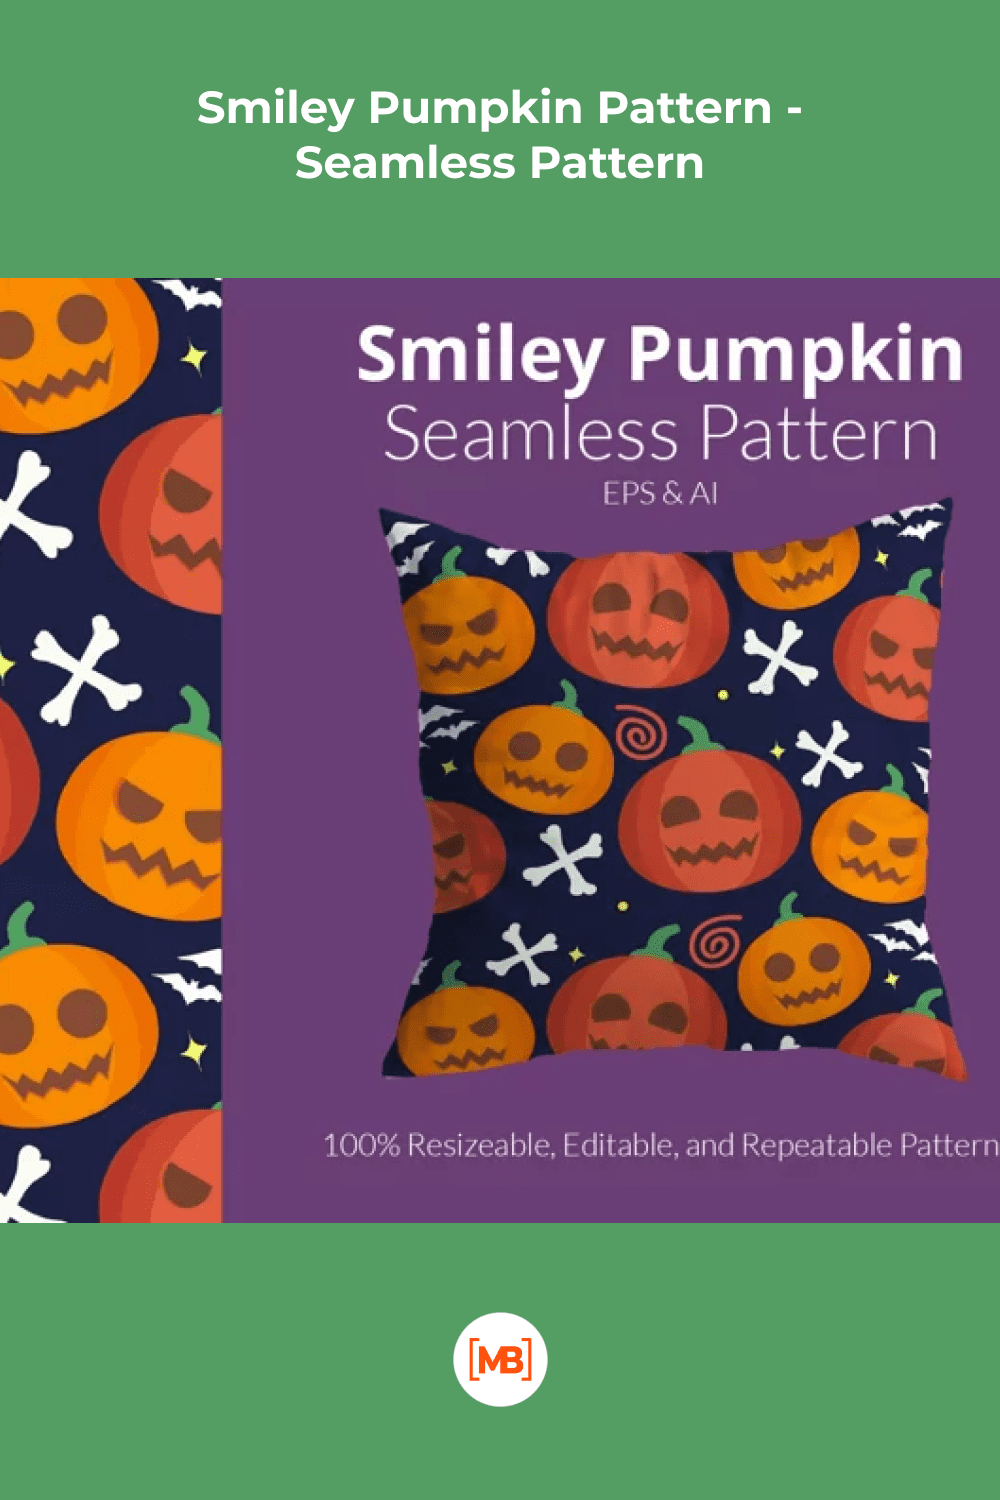 This is a collection of varied pumpkin variations for your illustrations.